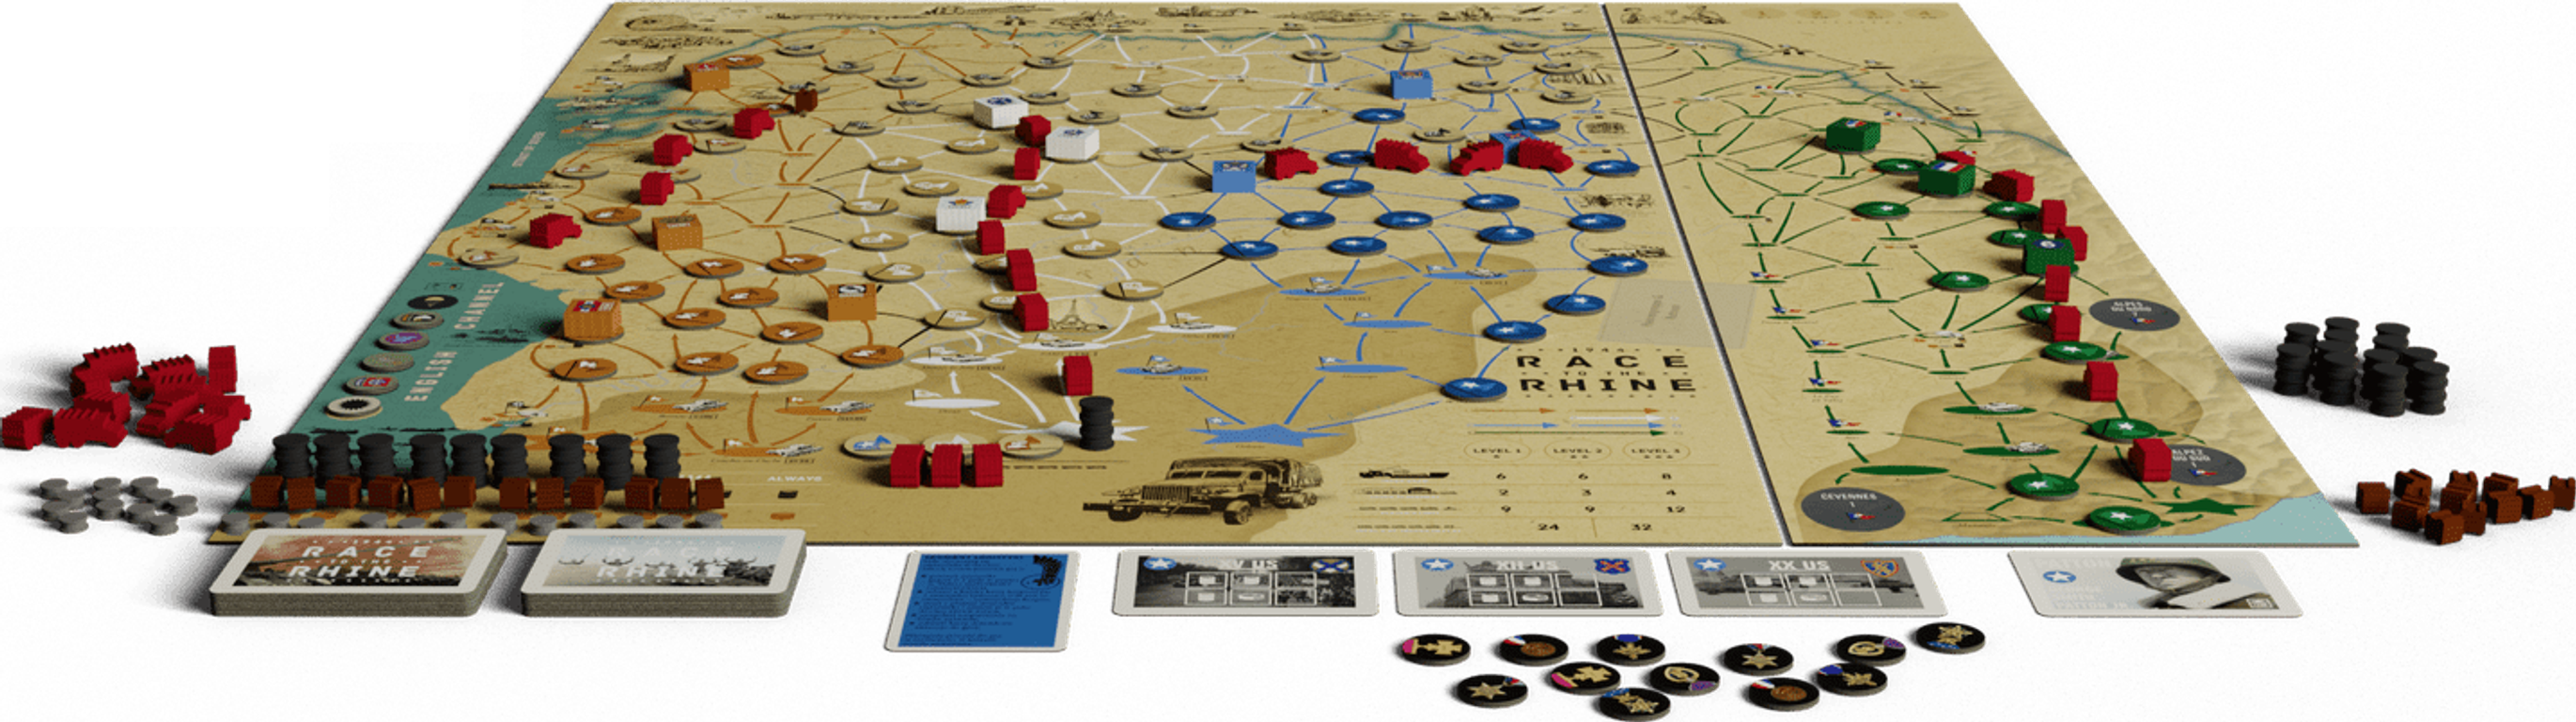 Race to the Rhine: Keep'em Rolling components